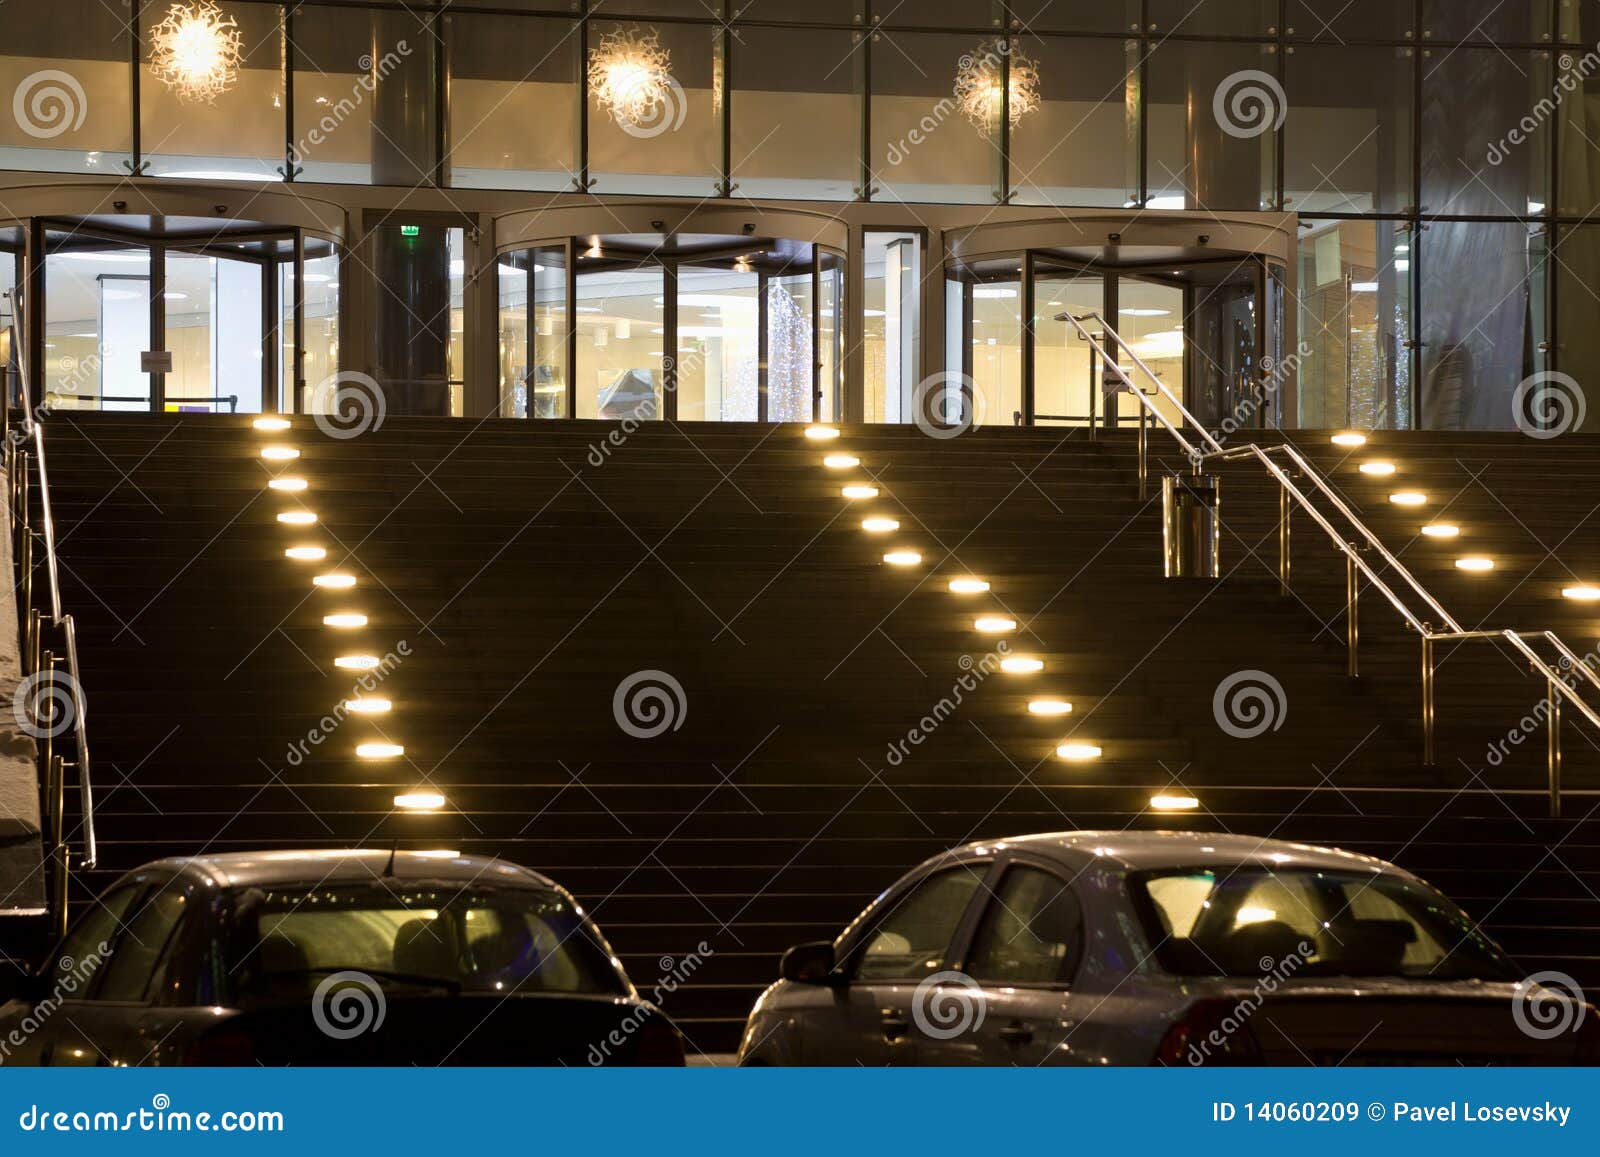 Grand Entrance In Modern Office Building Stock Image Image Of Generic